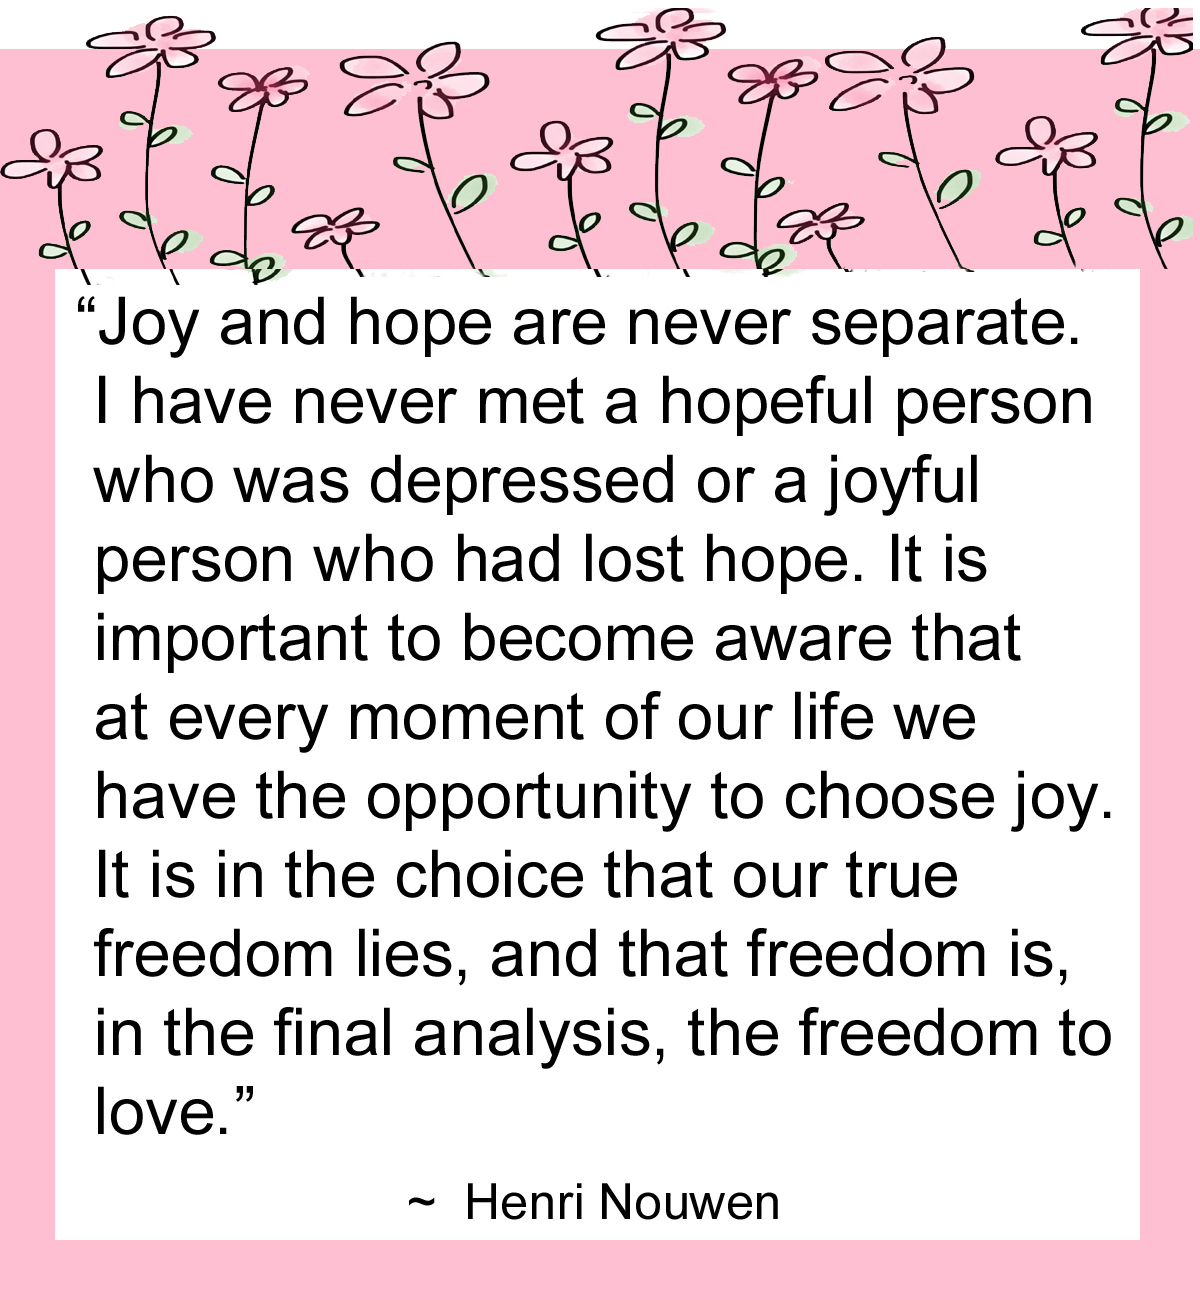 Joy and Hope are Never Separate – Henri Nouwen